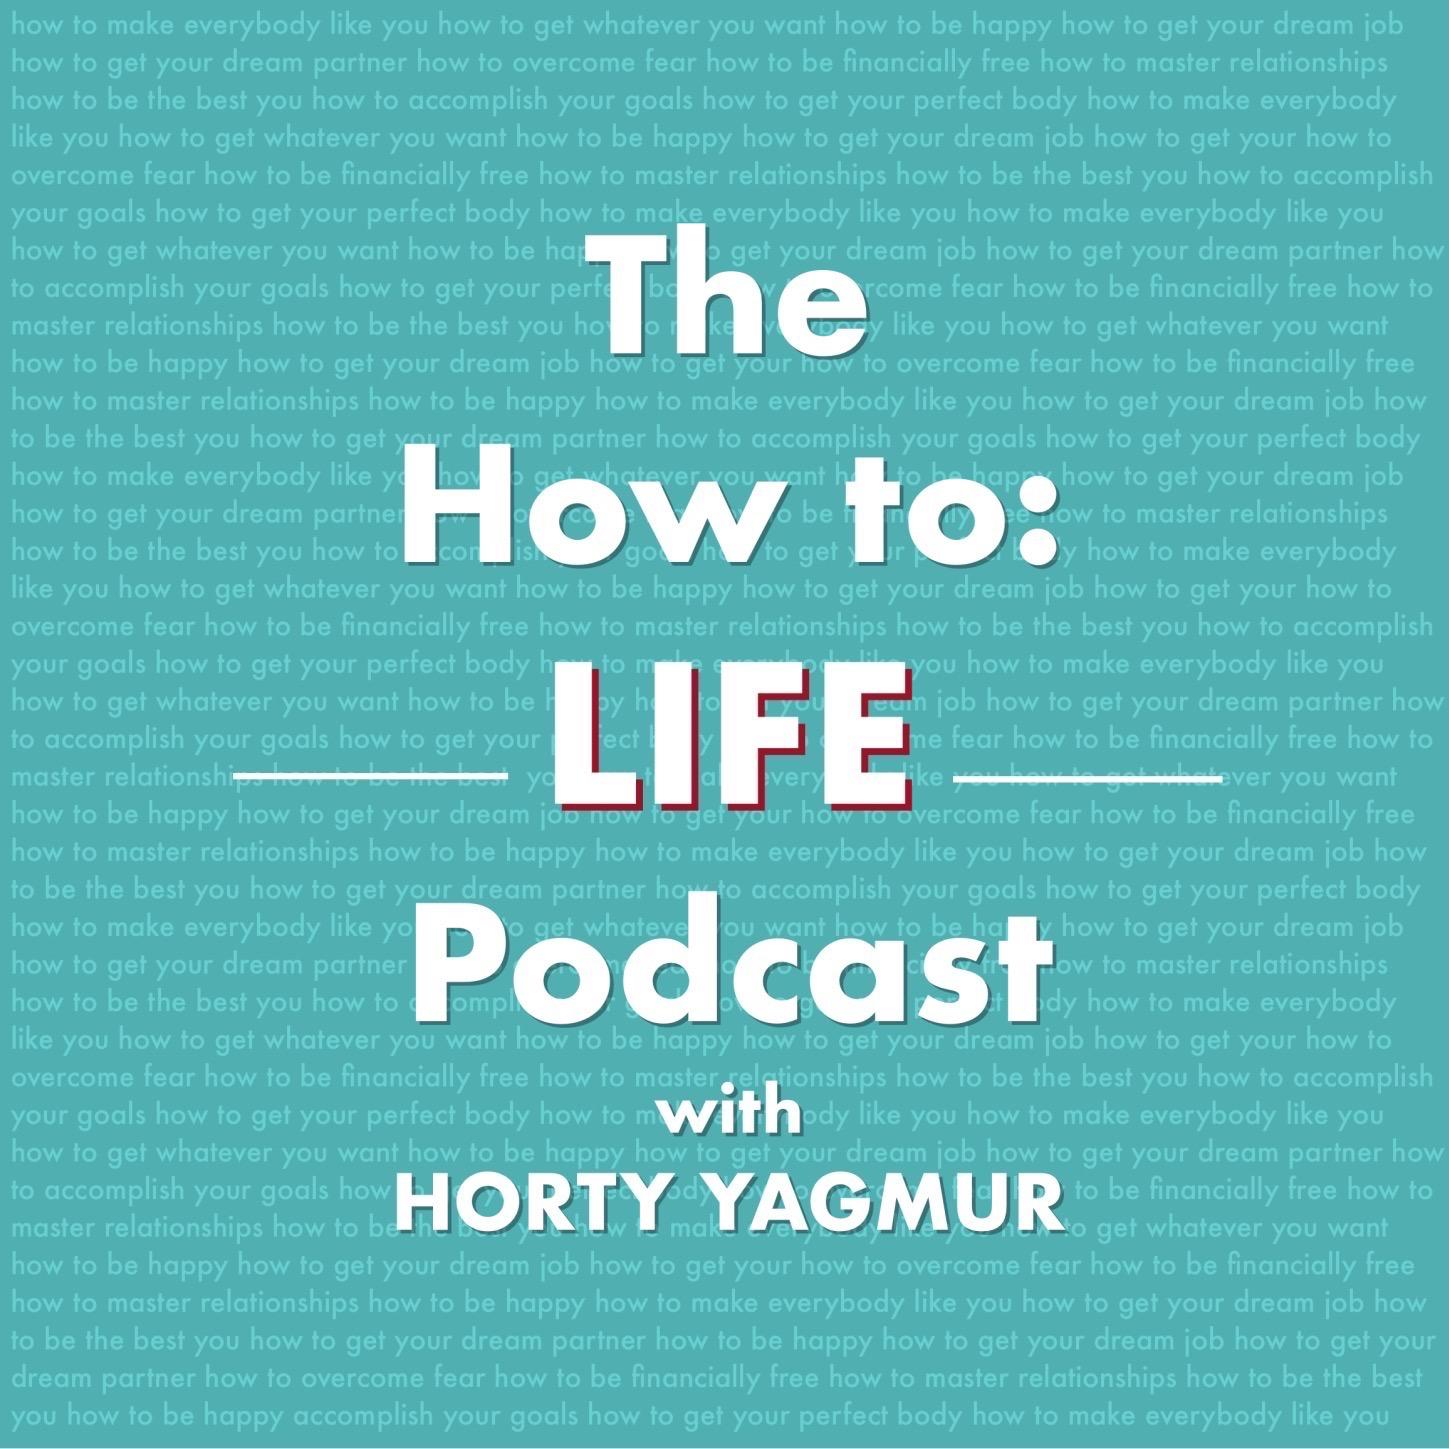 The How to: Life podcast